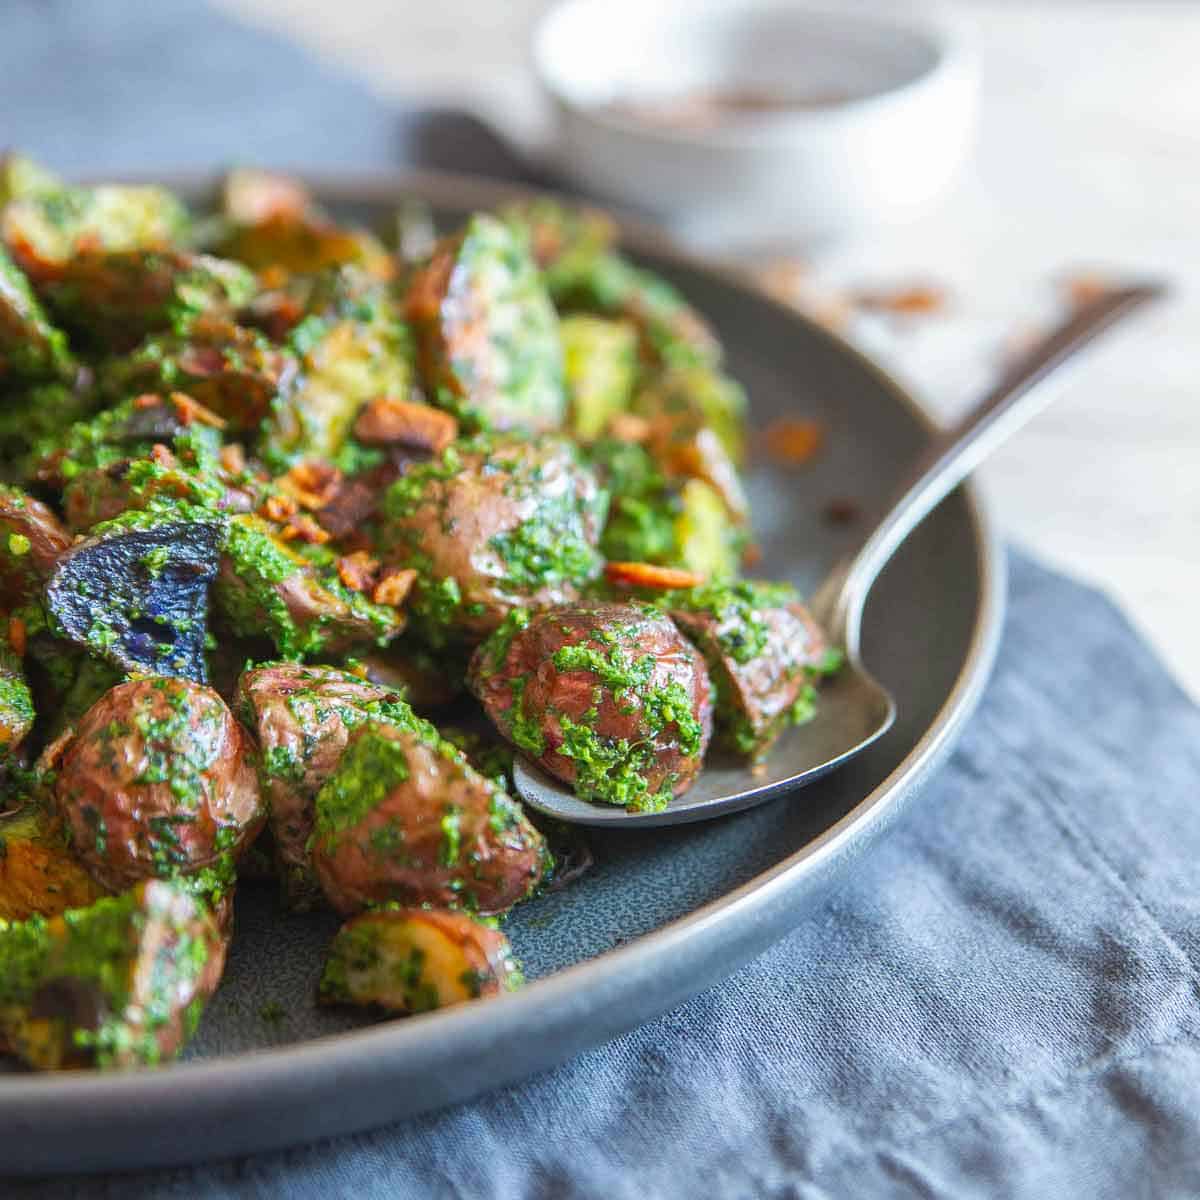 Crispy roasted potatoes with fresh pesto and salty bacon bits make this potato side dish a delicious option for almost any dinner.